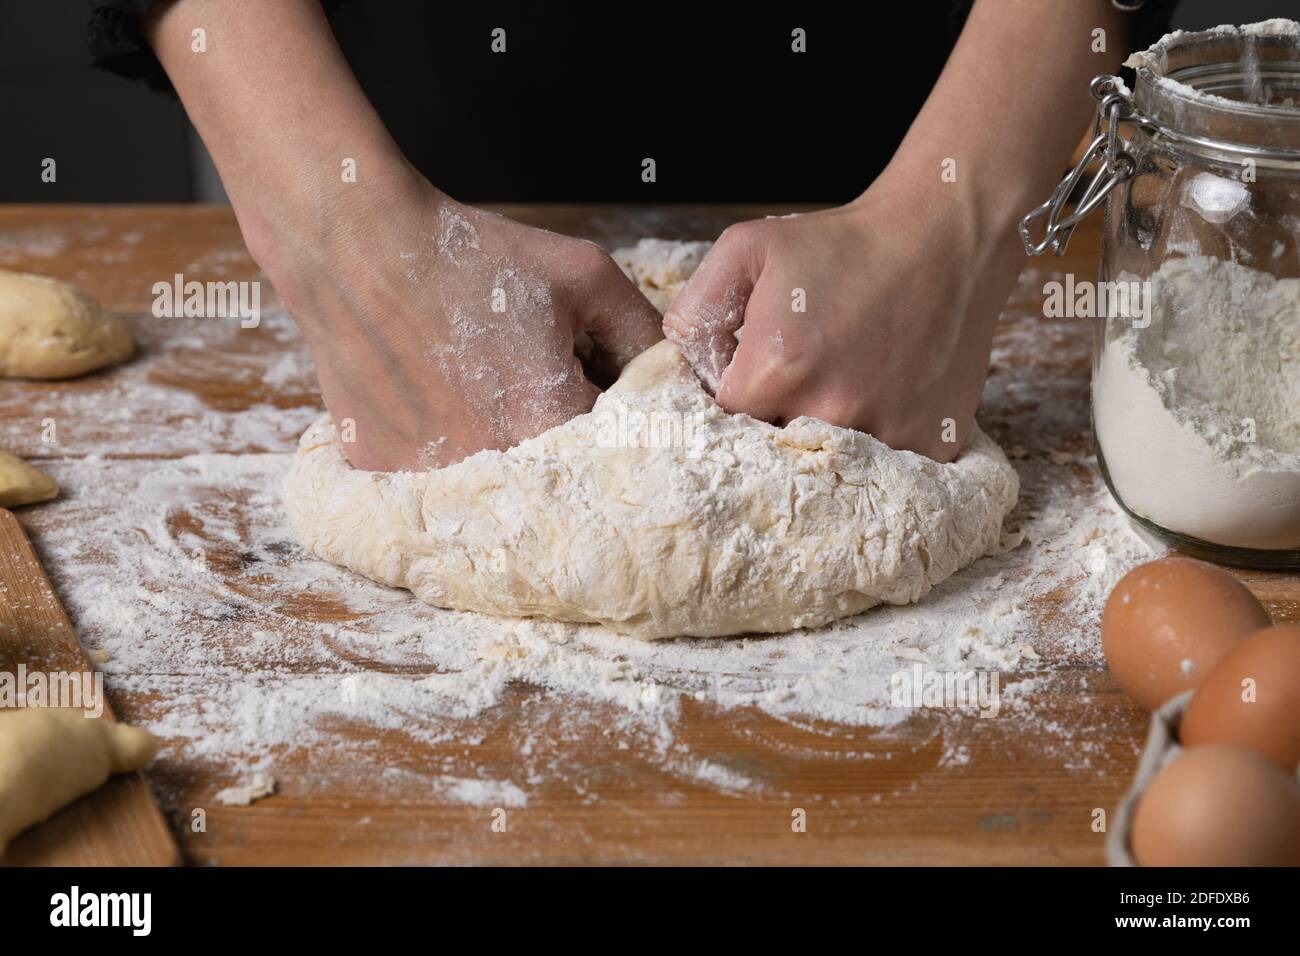 Young beautiful woman kneading dough at a wooden table in kitchen. Housewife hobbies concept. Stock Photo